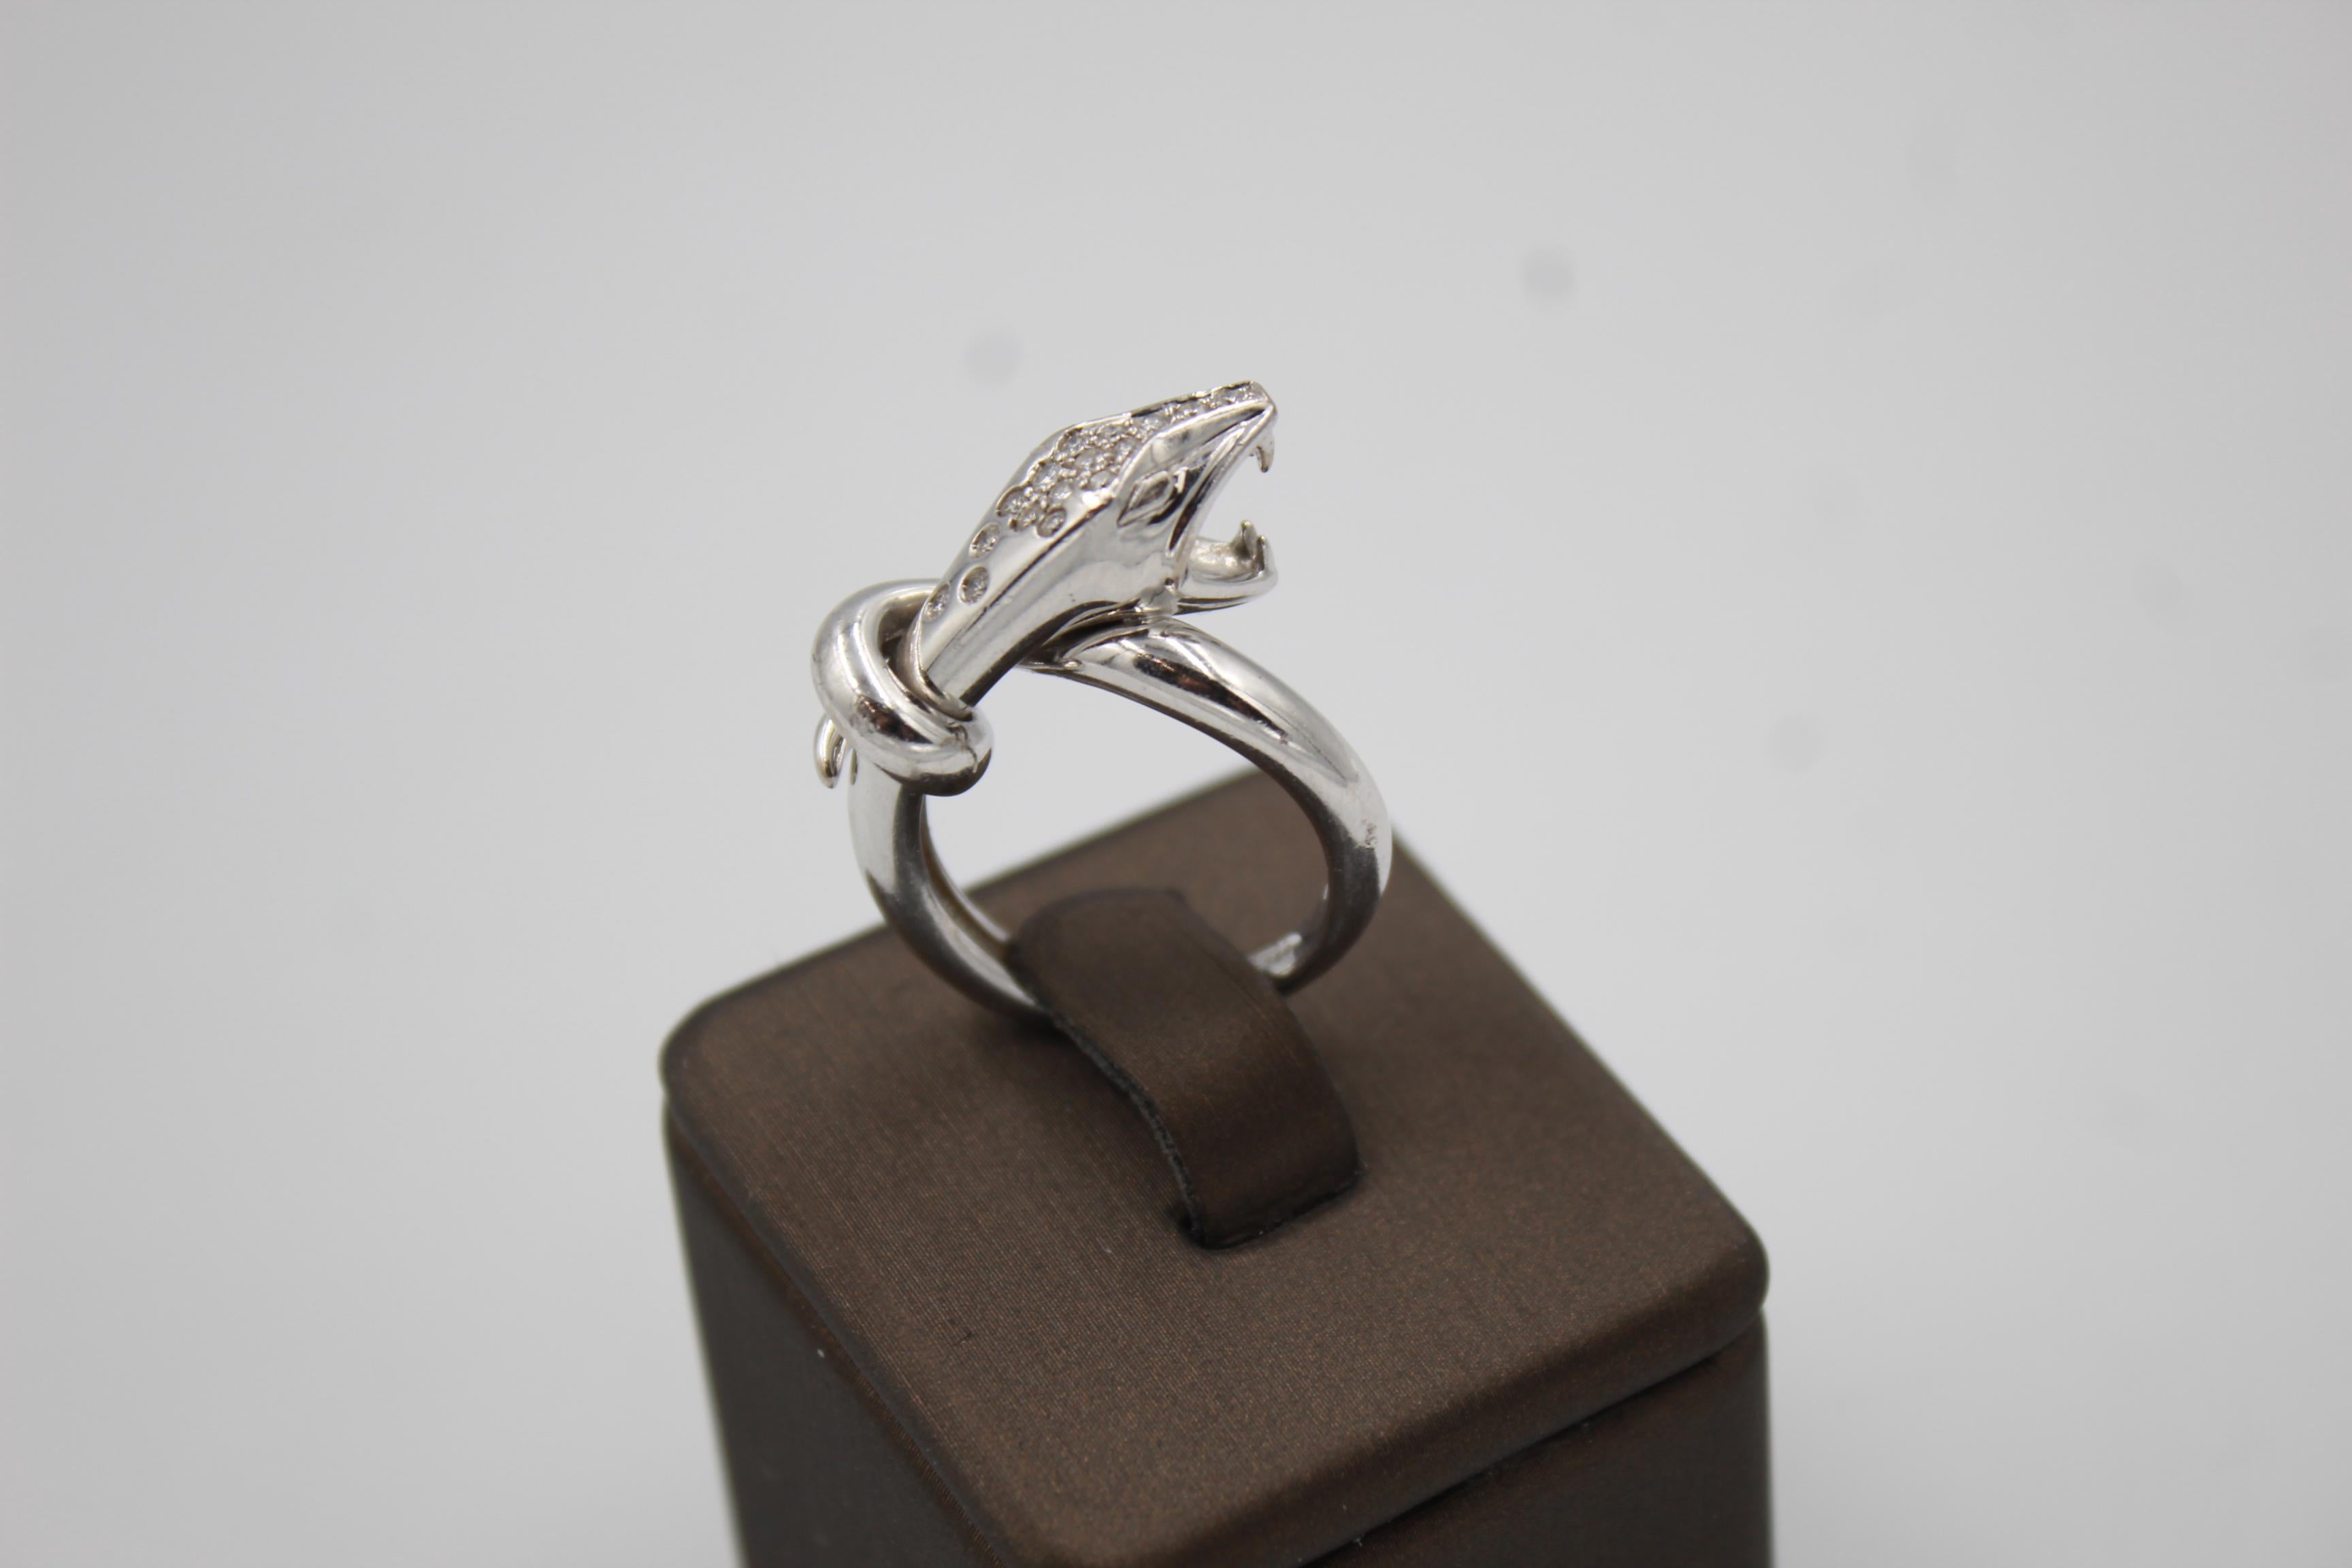 Awesome and like now Boucheron trouble snake ring inwhite gold and diamonds.
Size 51
Really good condition